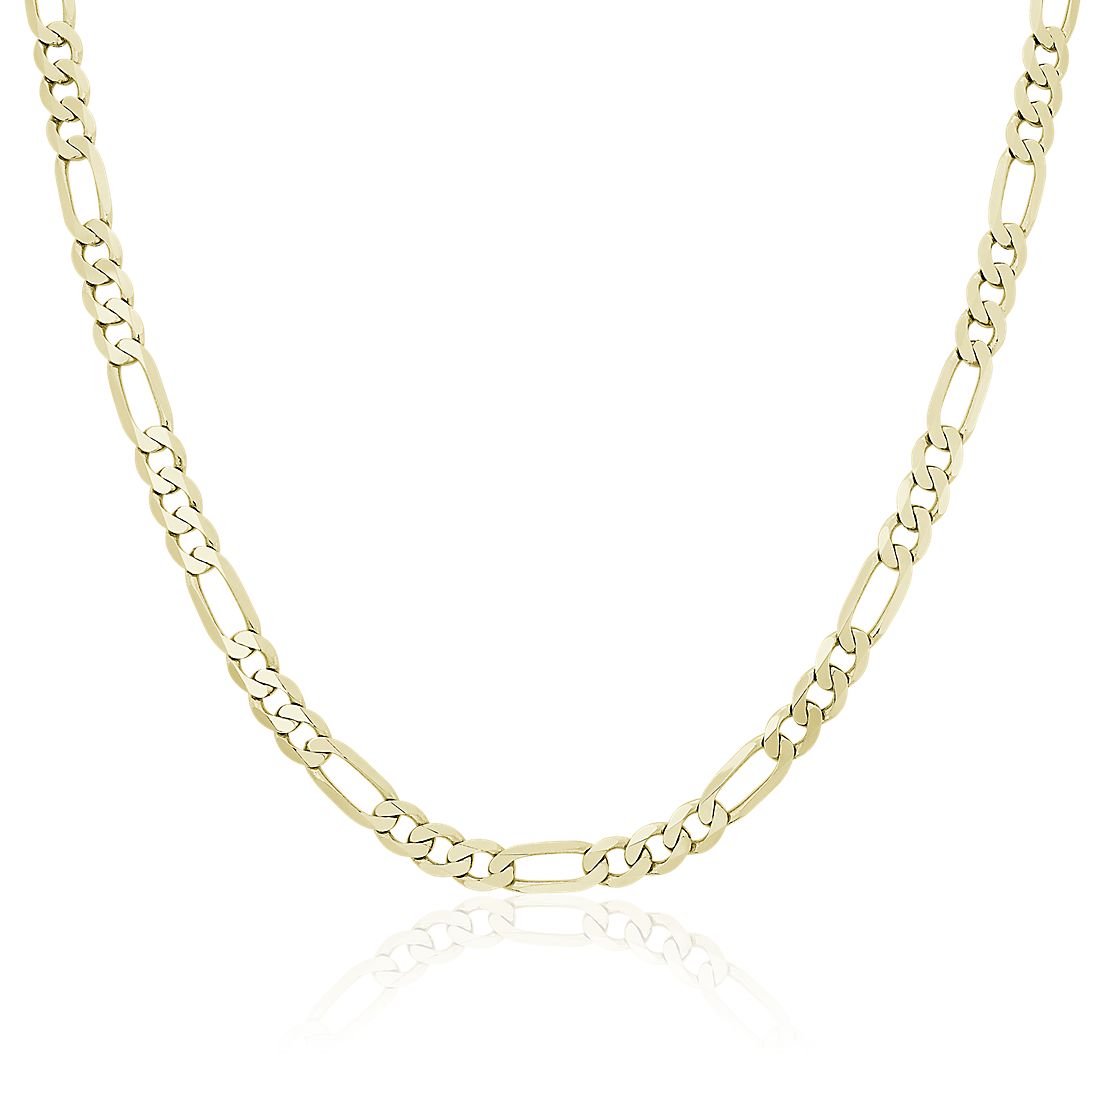 Close up of a yellow gold men's chain necklace 